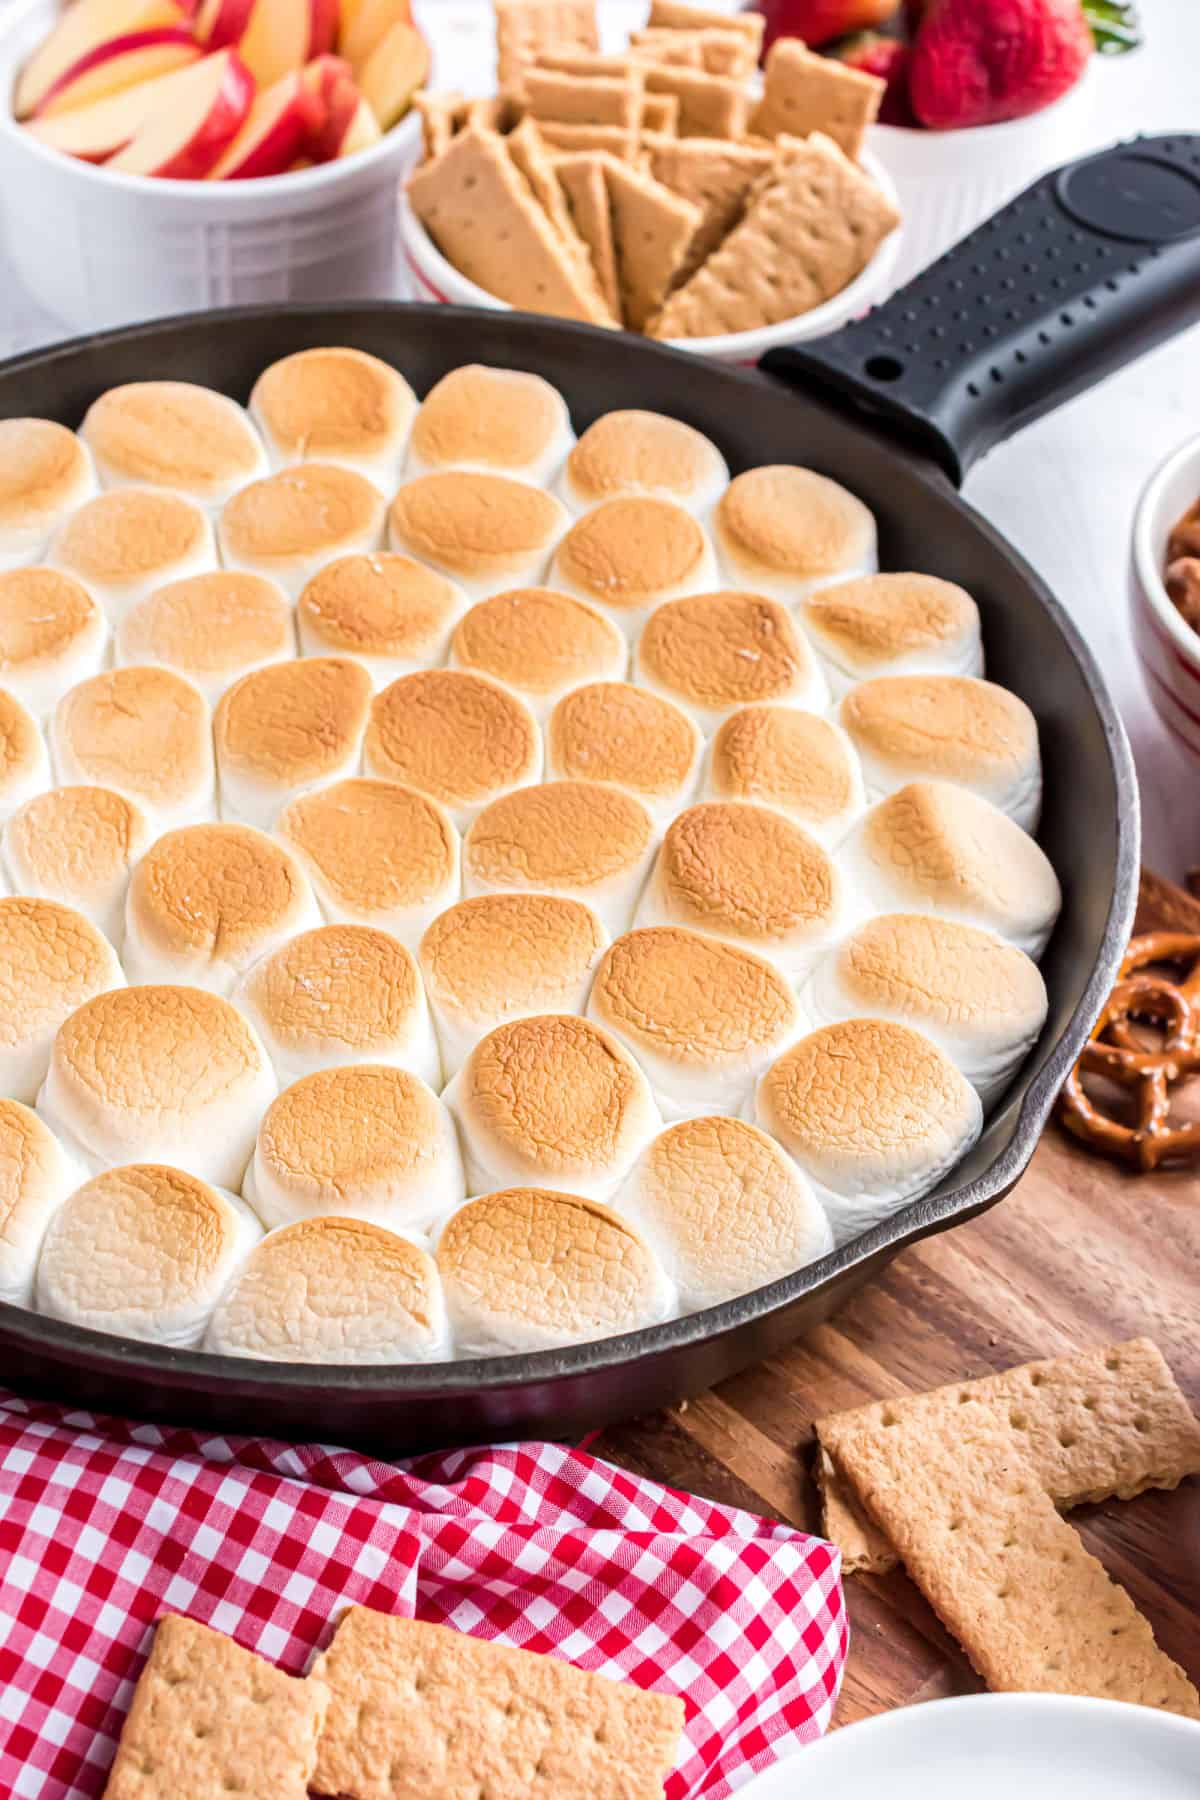 Smores dip; served in cast iron skillet with graham crackers for dipping.